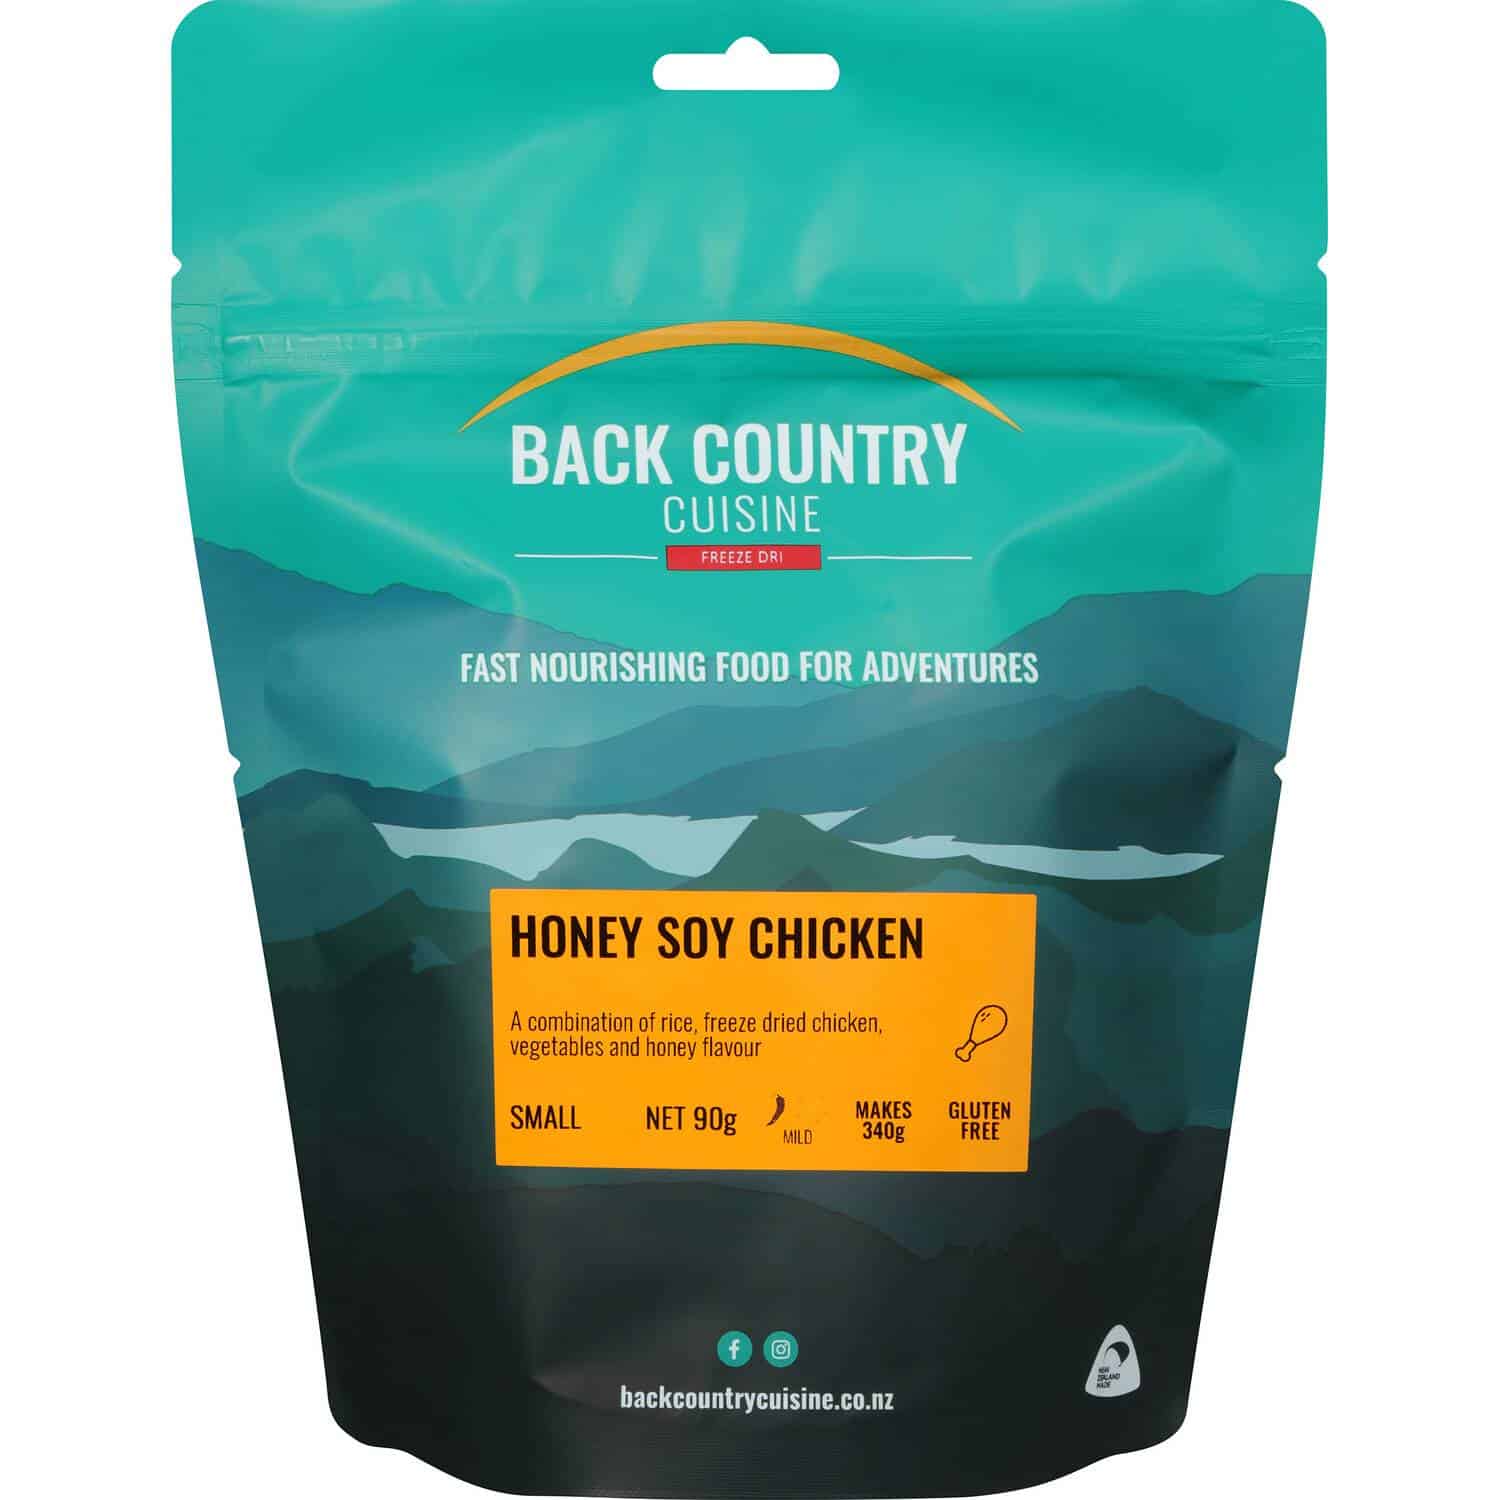 Back Country Cuisine Honey Soy Chicken Small - Tramping Food and Accessories sold by Venture Outdoors NZ